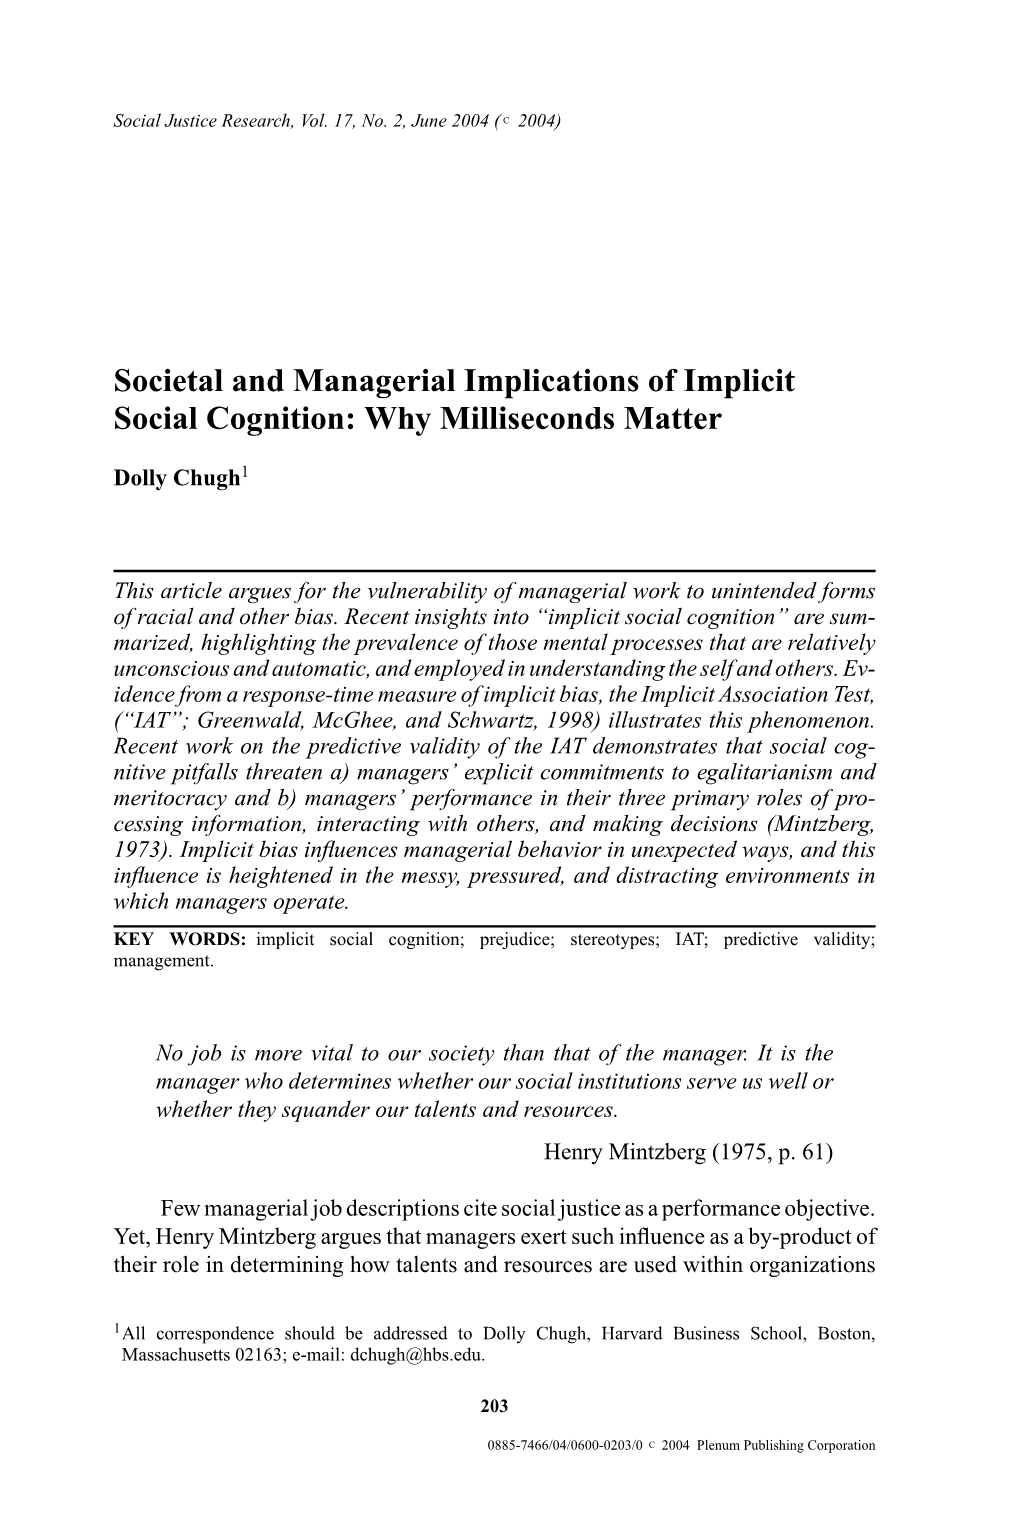 Societal and Managerial Implications of Implicit Social Cognition: Why Milliseconds Matter